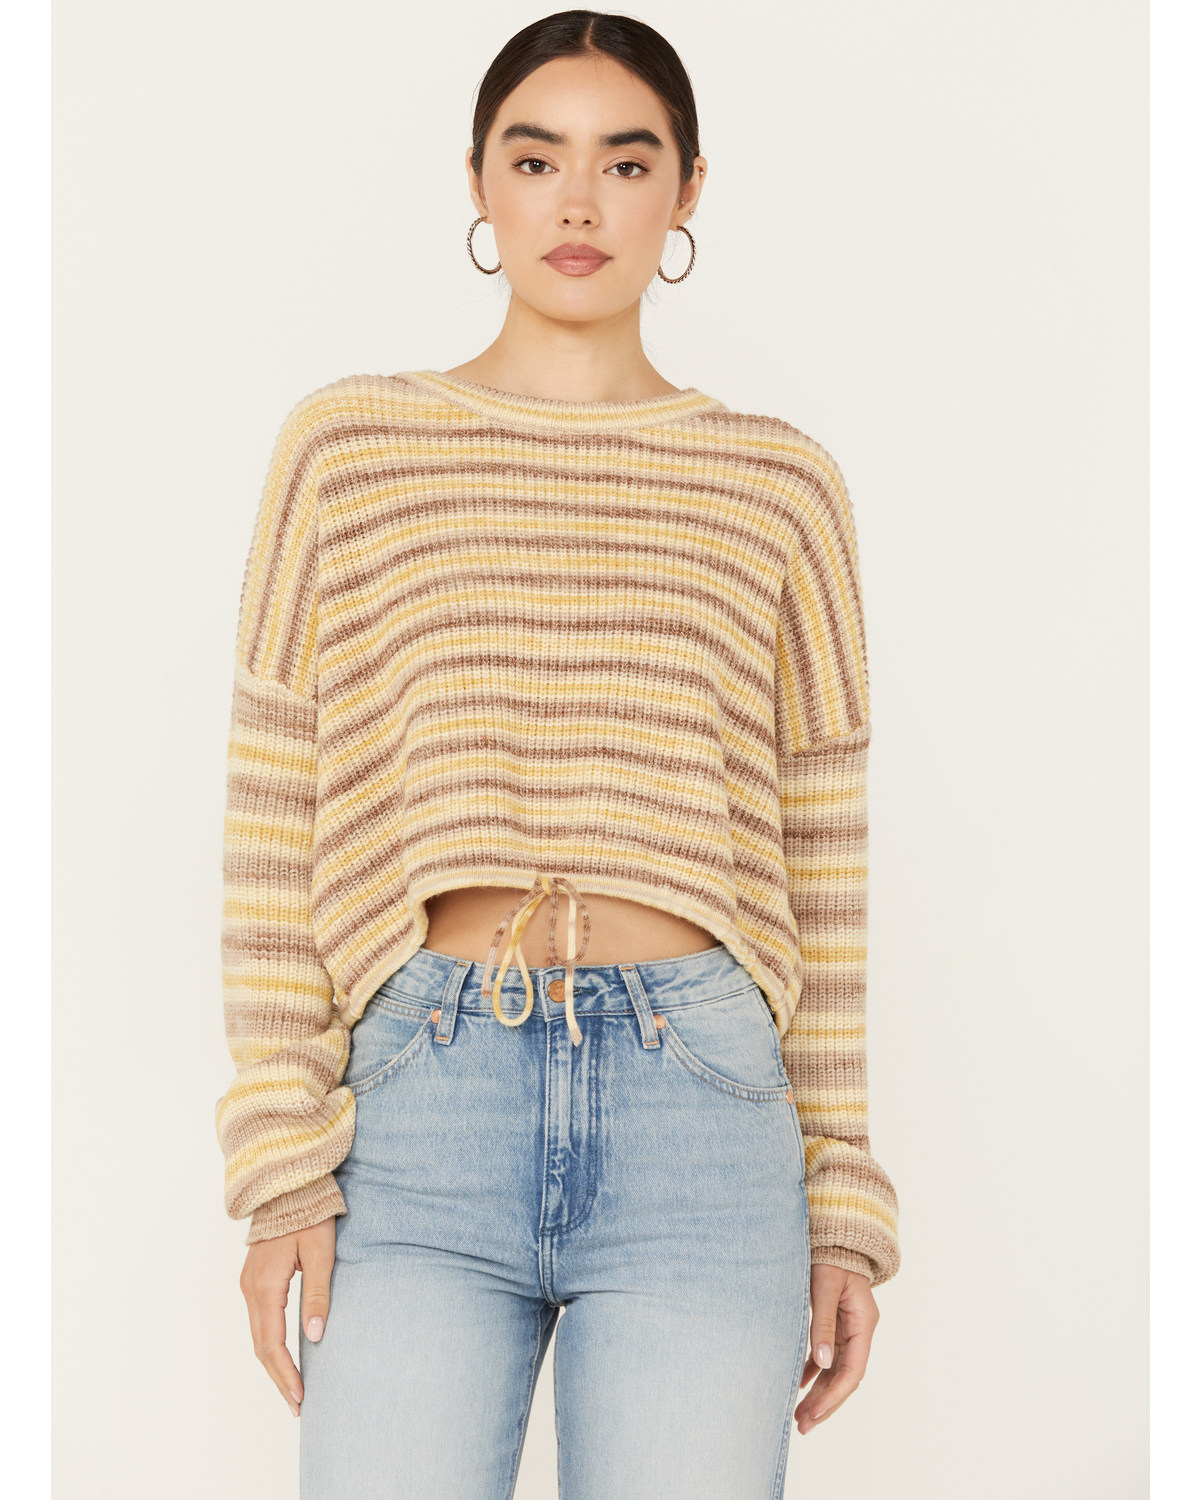 Revel Women's Striped Cinched Bottom Sweater